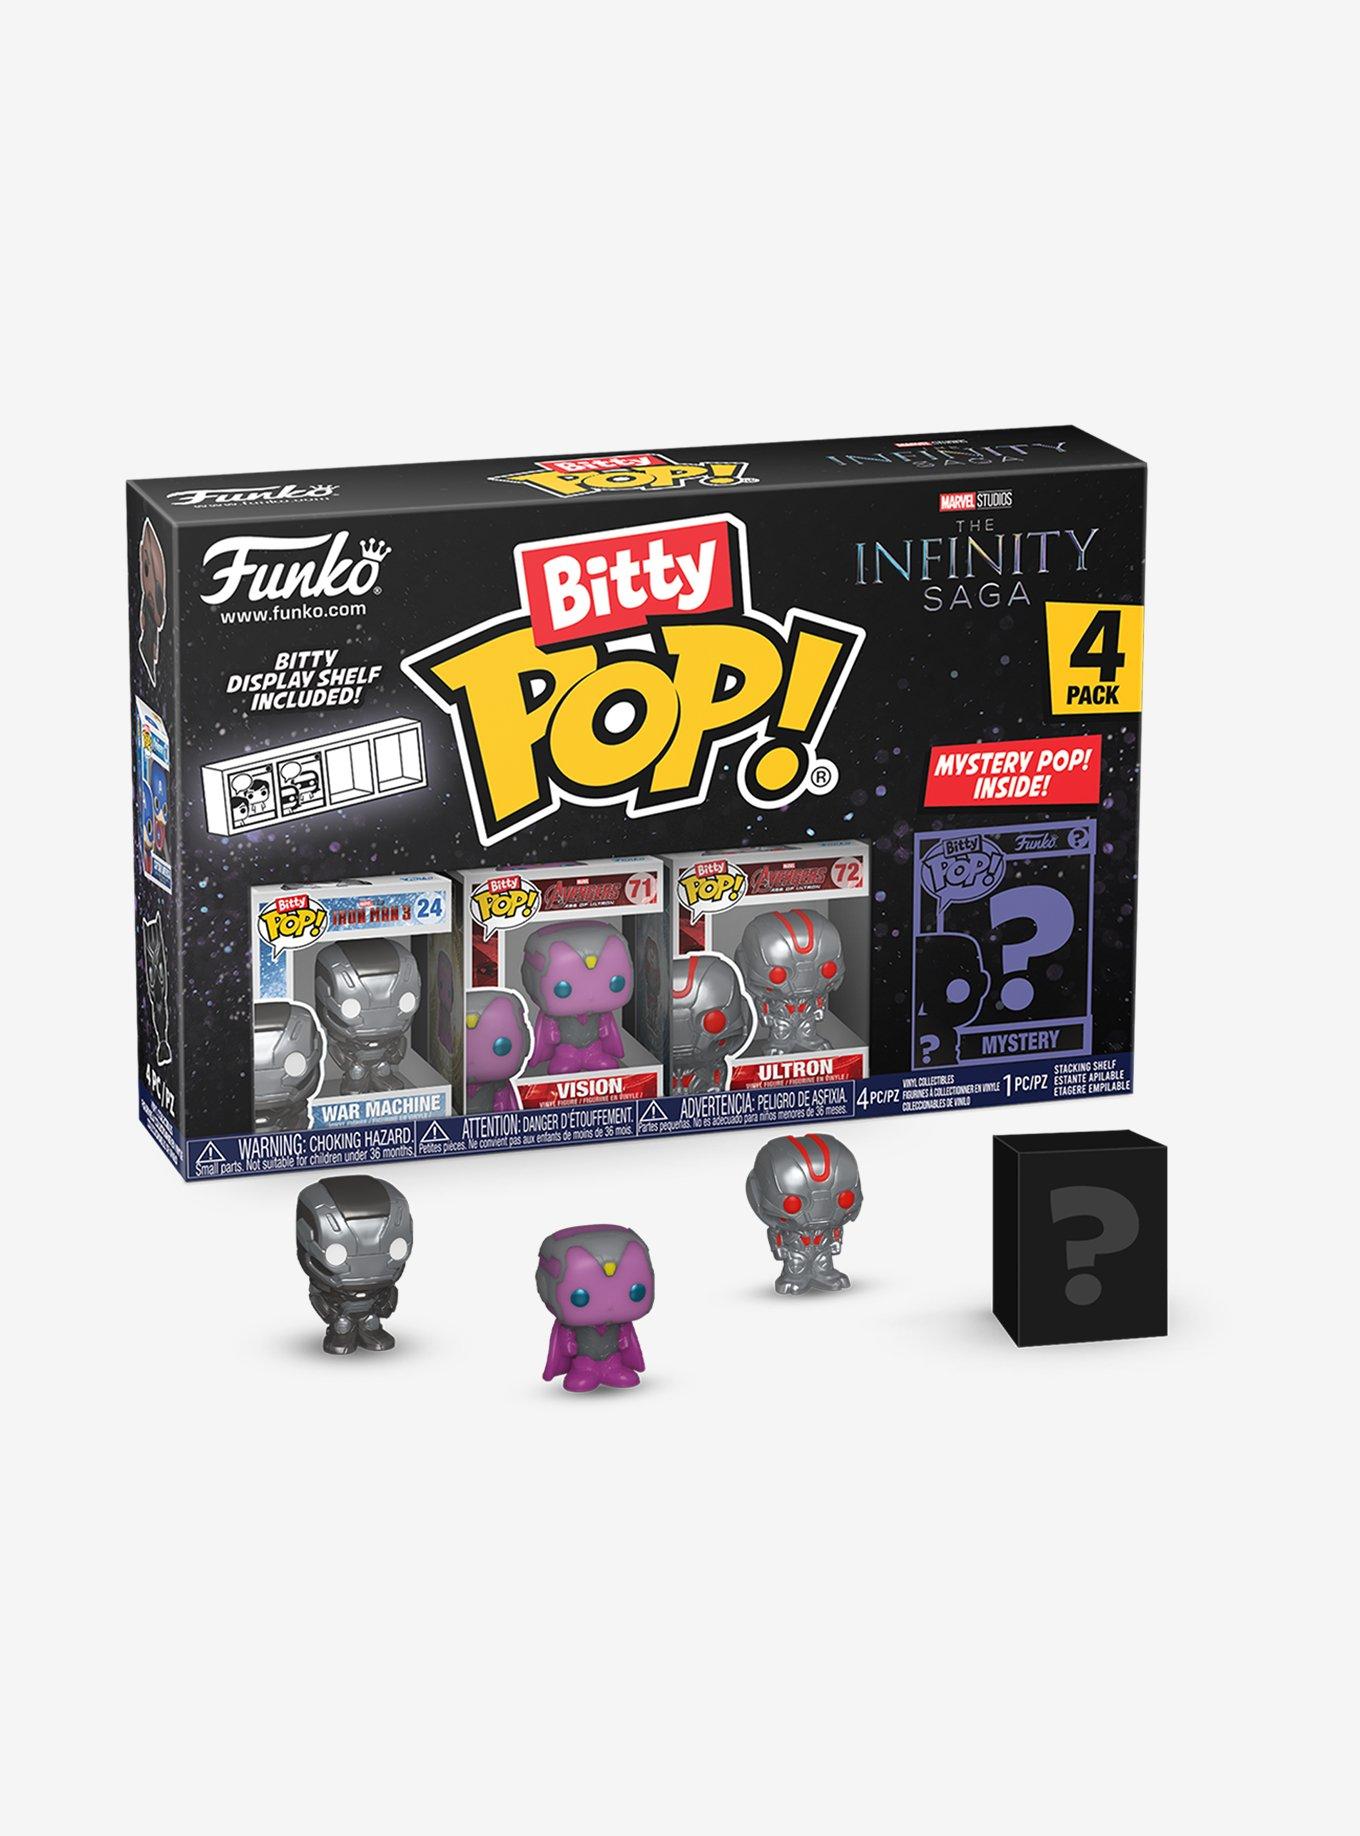 Funko Pop Fast & Furious Checklist, Set Gallery, Exclusives, Variants